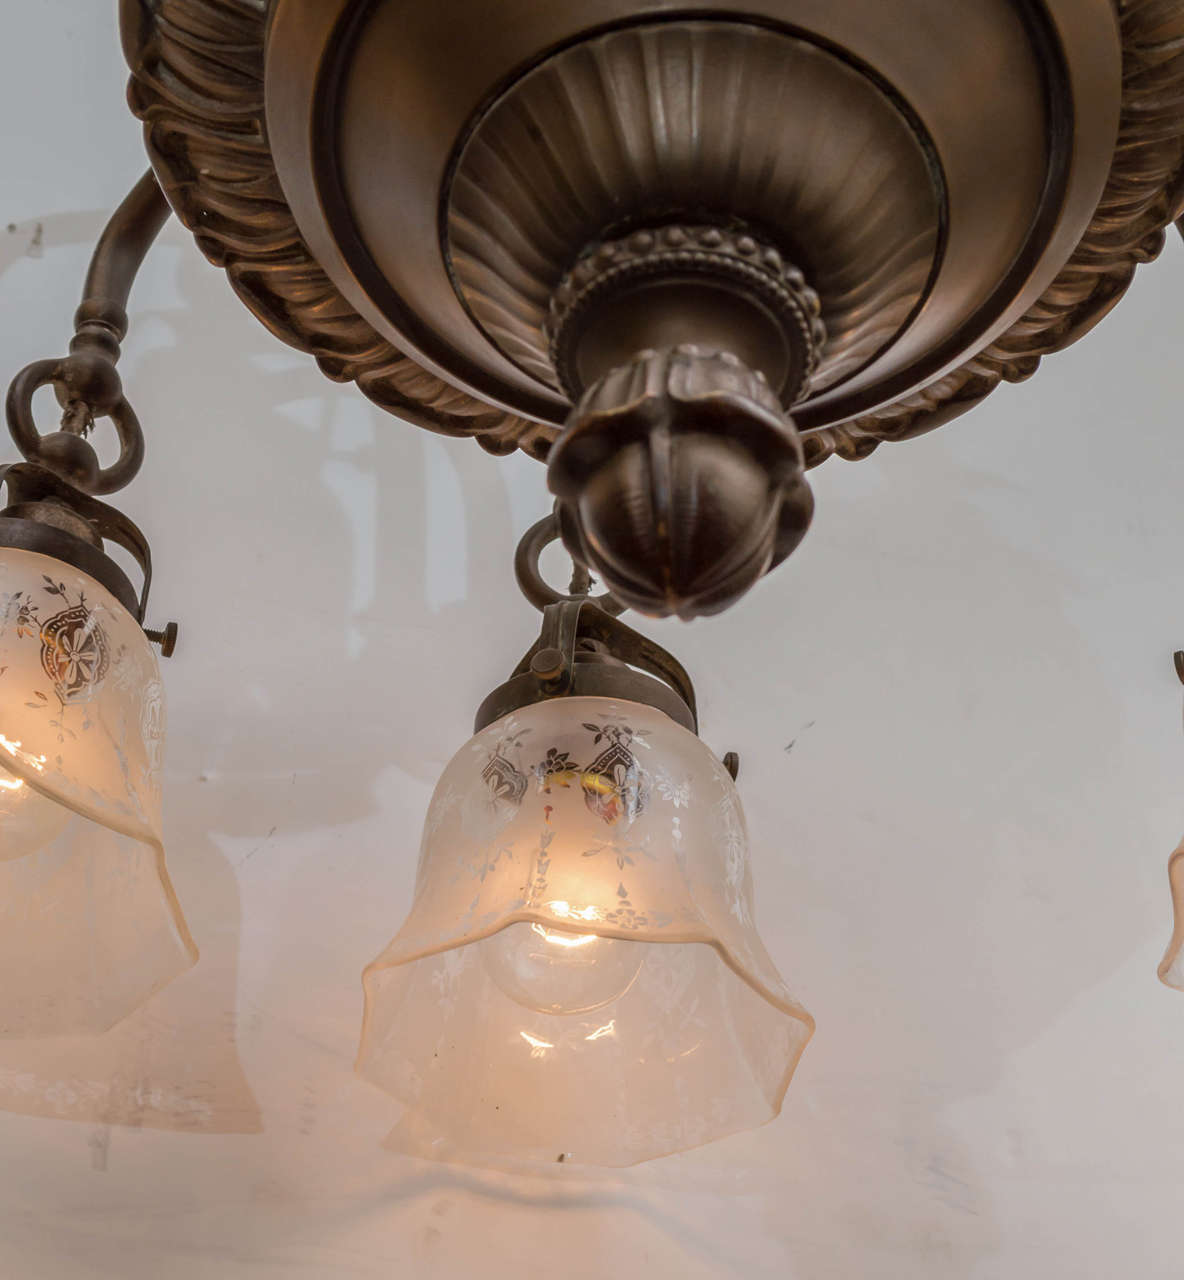 20th Century American Eight-Arm Edwardian Period Chandelier with Period Etched Shades